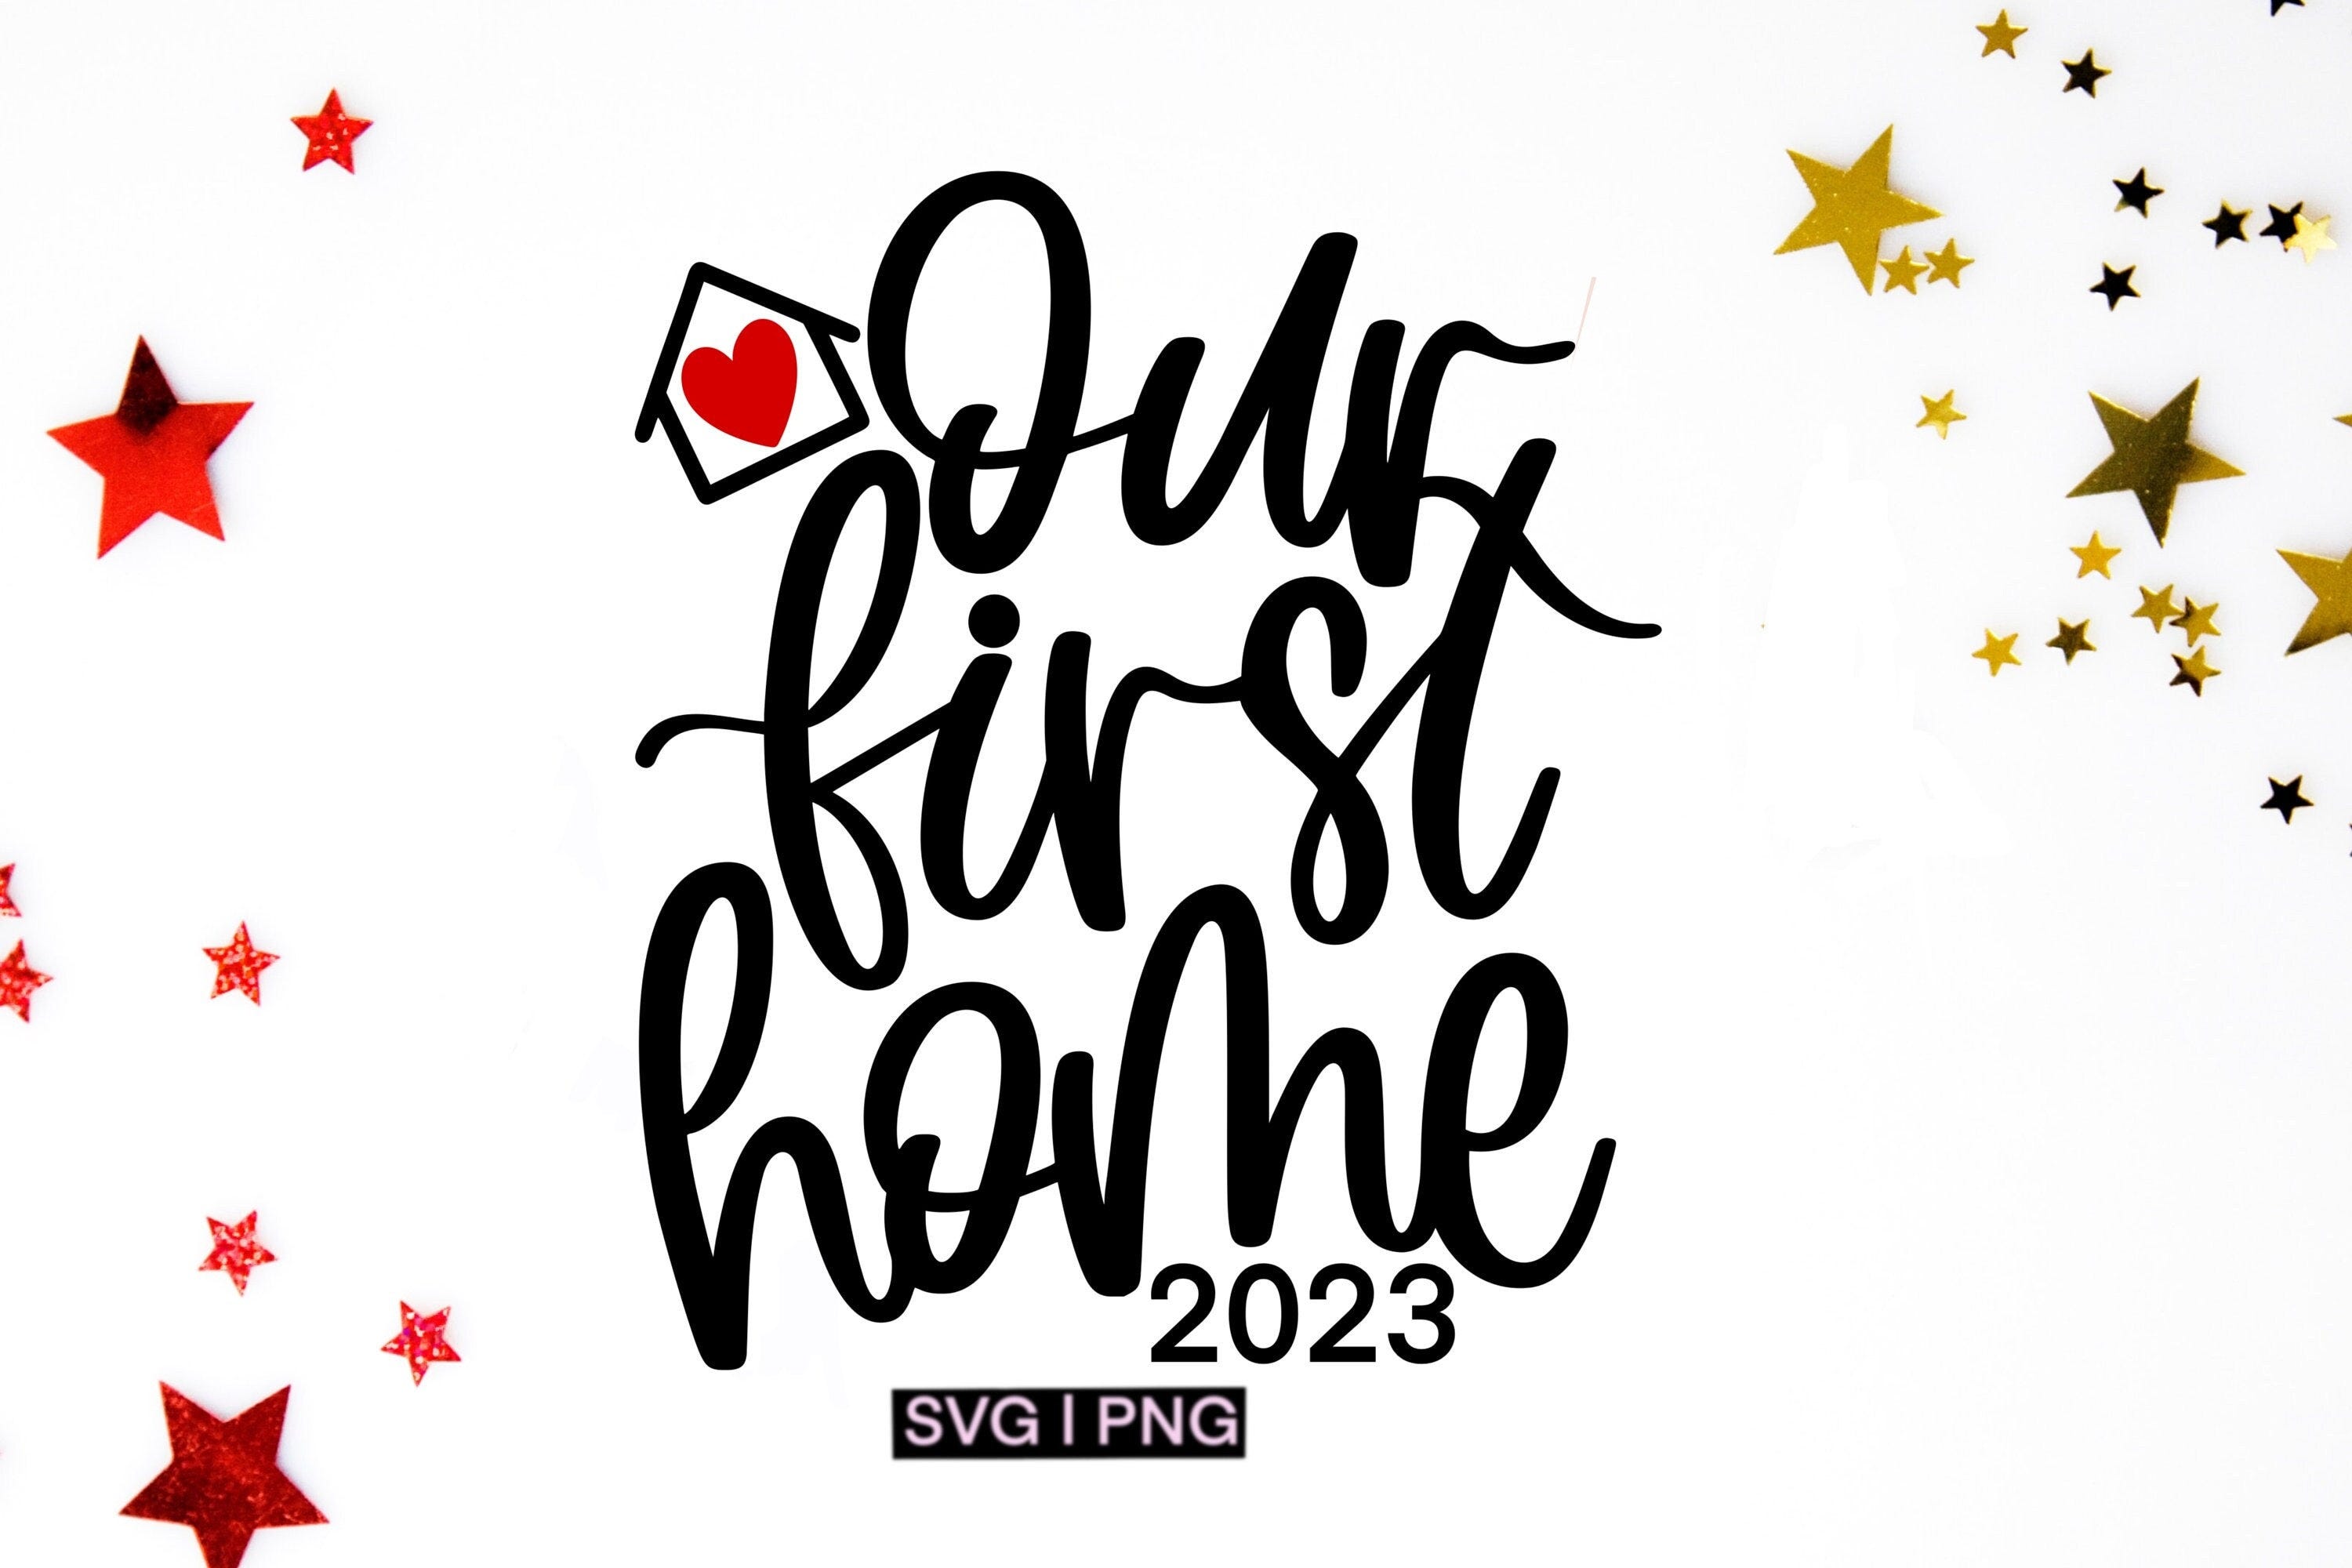 Our first home 2023 svg, christmas ornament svg, first home svg, new home svg, christmas 2023 svg, xmas ornament svg, first christmas svg